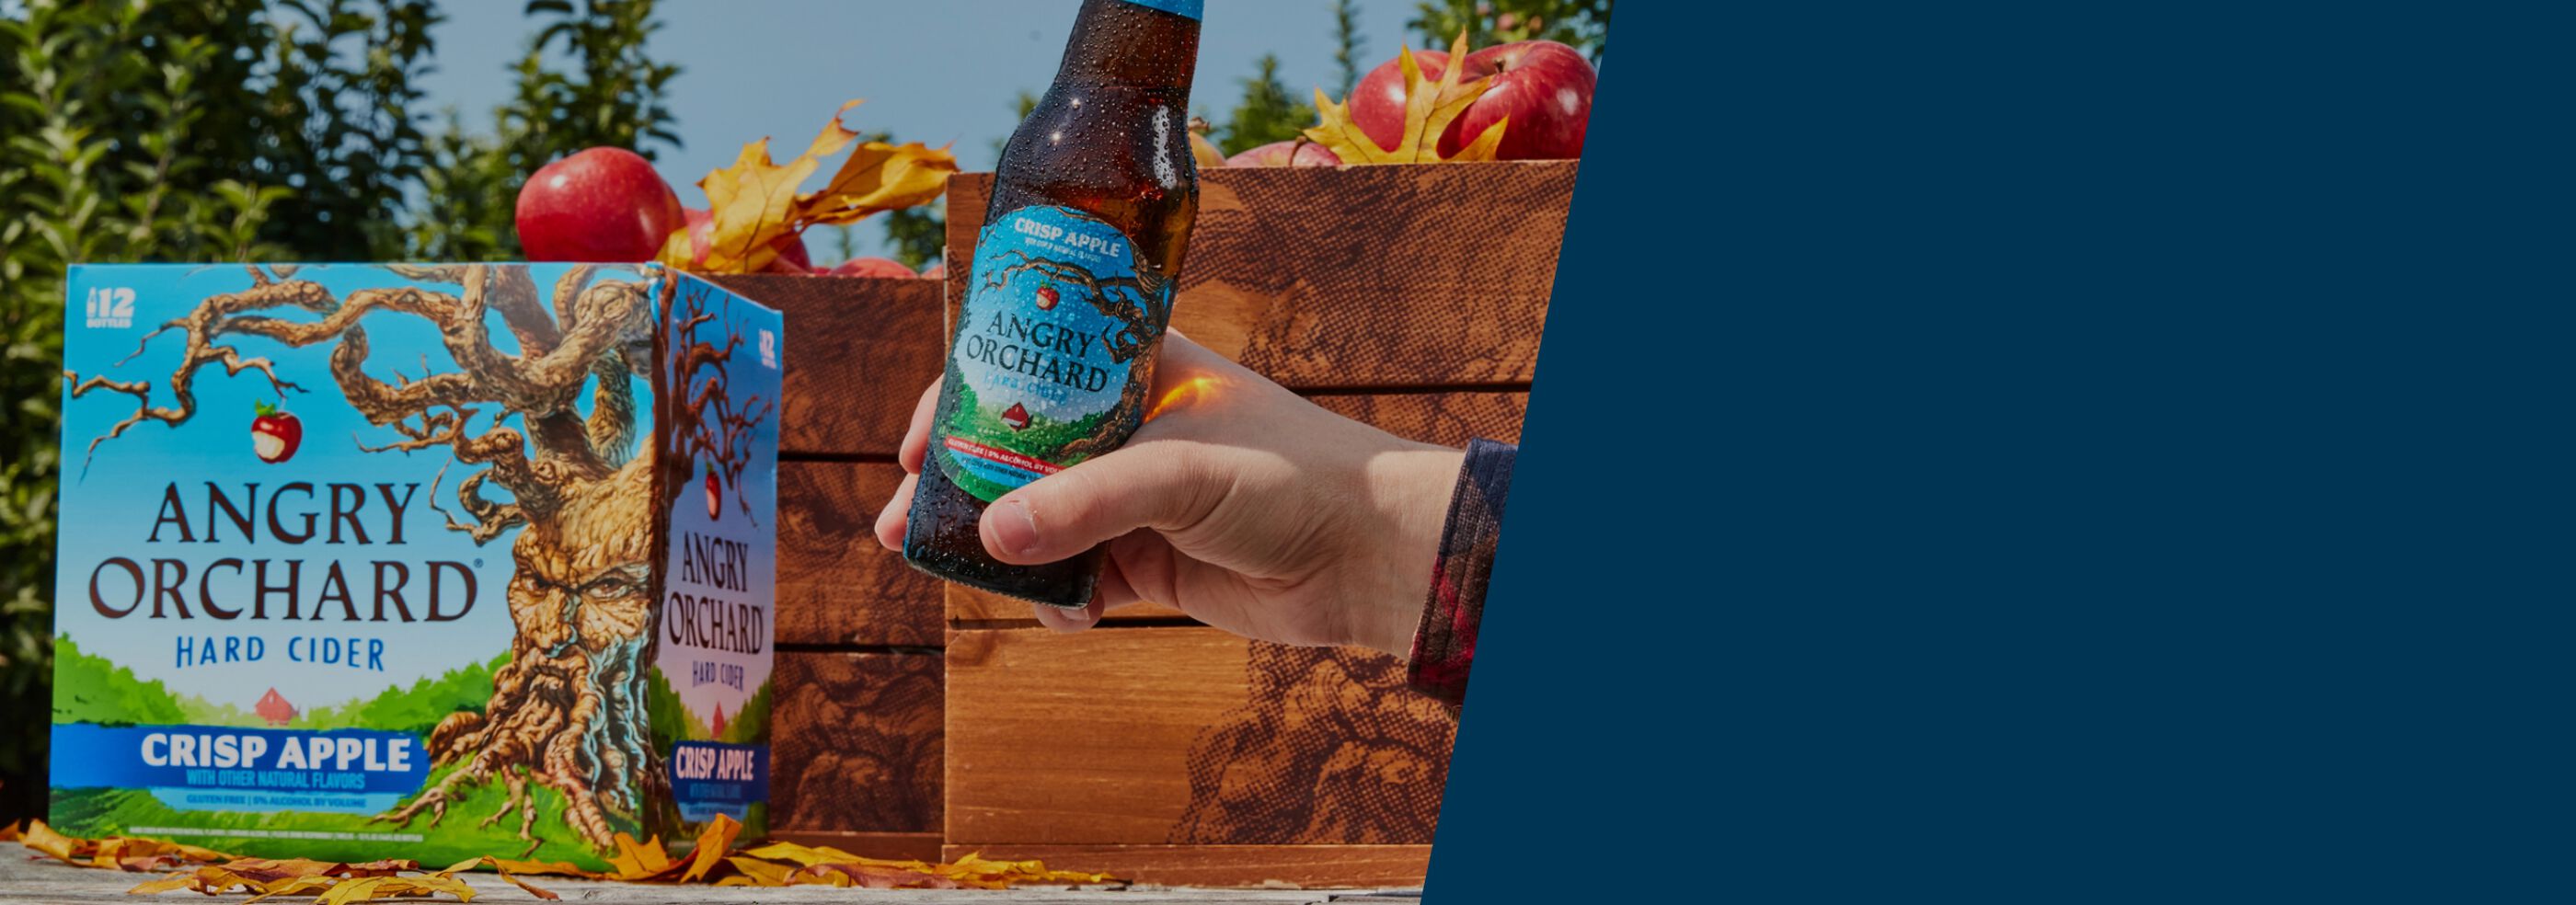 Bottle and case of Angry Orchard with apples